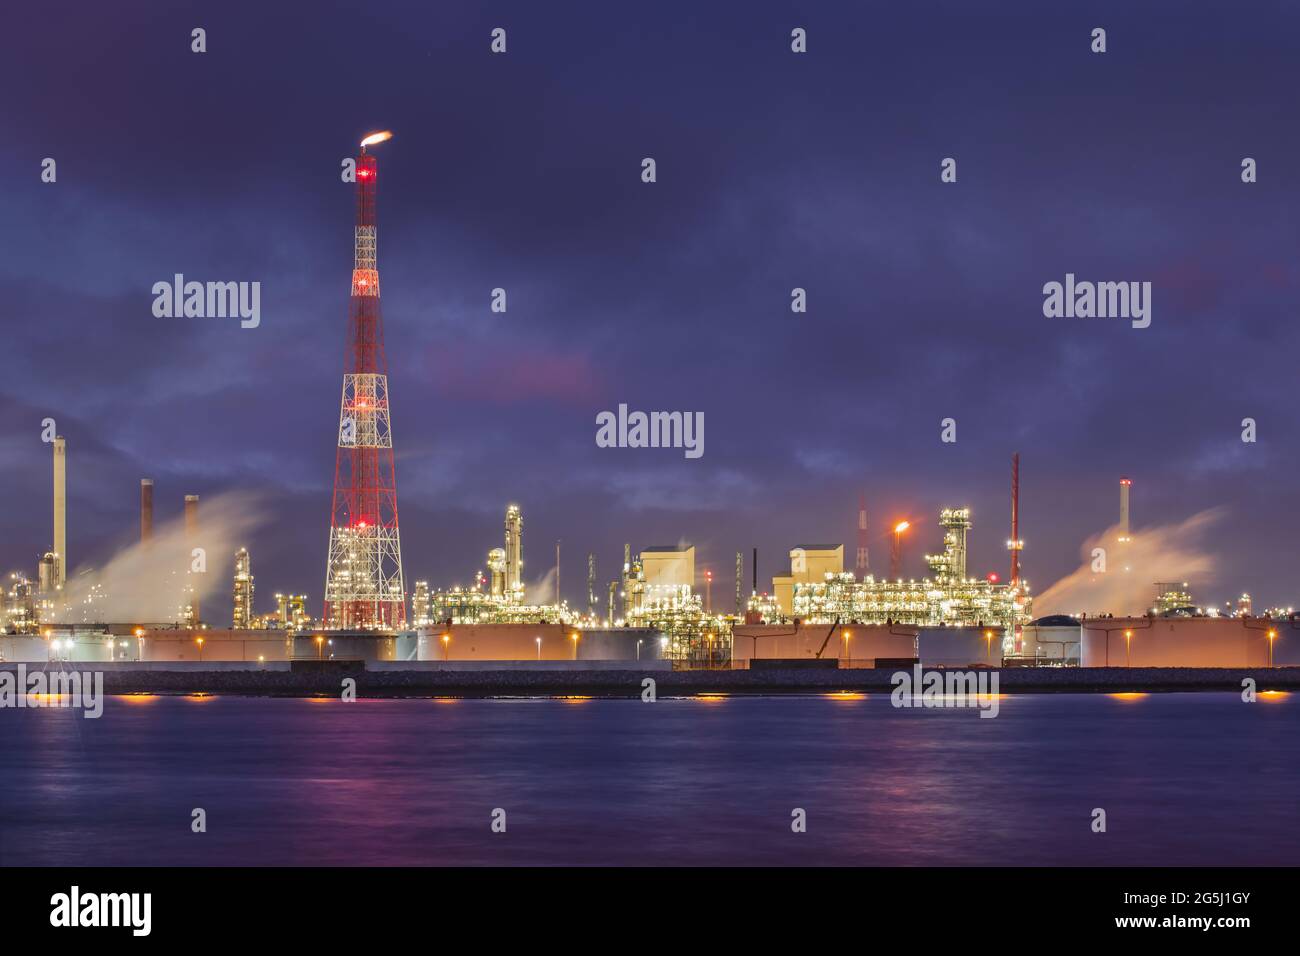 Night scene with illuminated petrochemical production plant on riverbank, Port of Antwerp Stock Photo